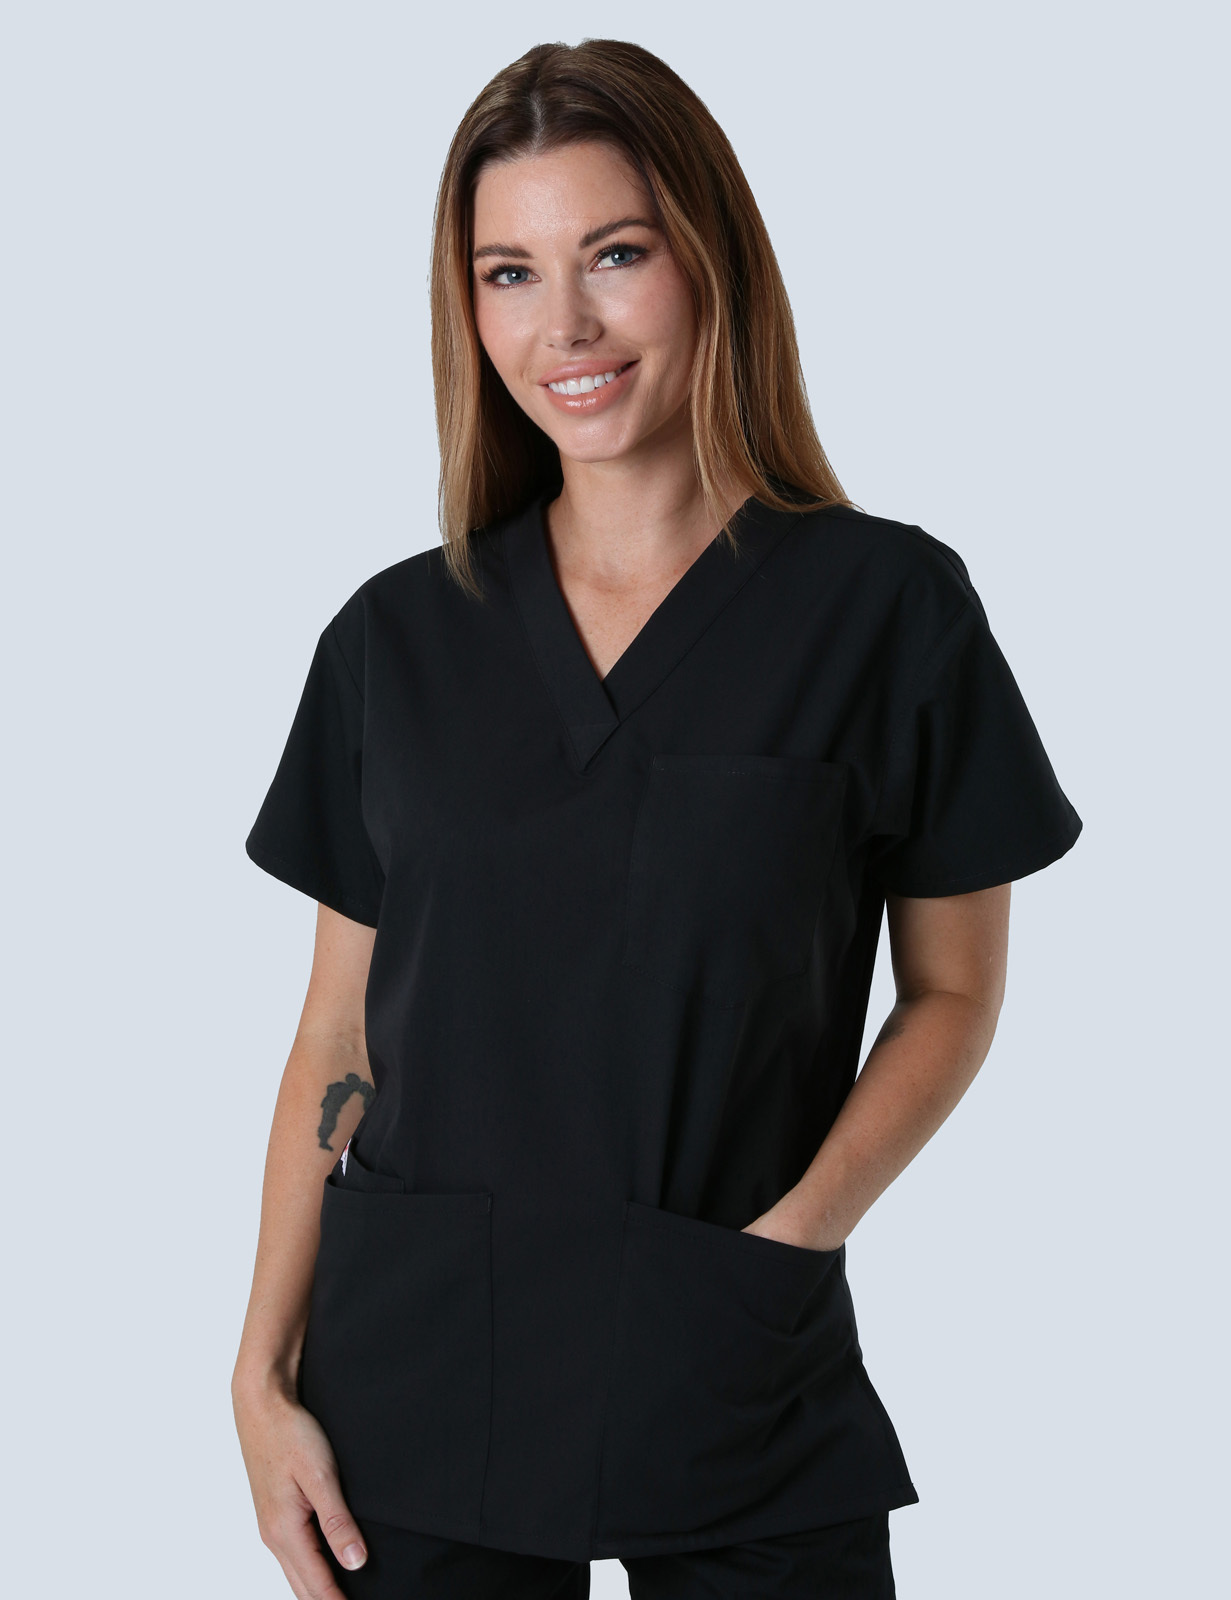 Dentists & Specialists - 4 Pocket Top in Black